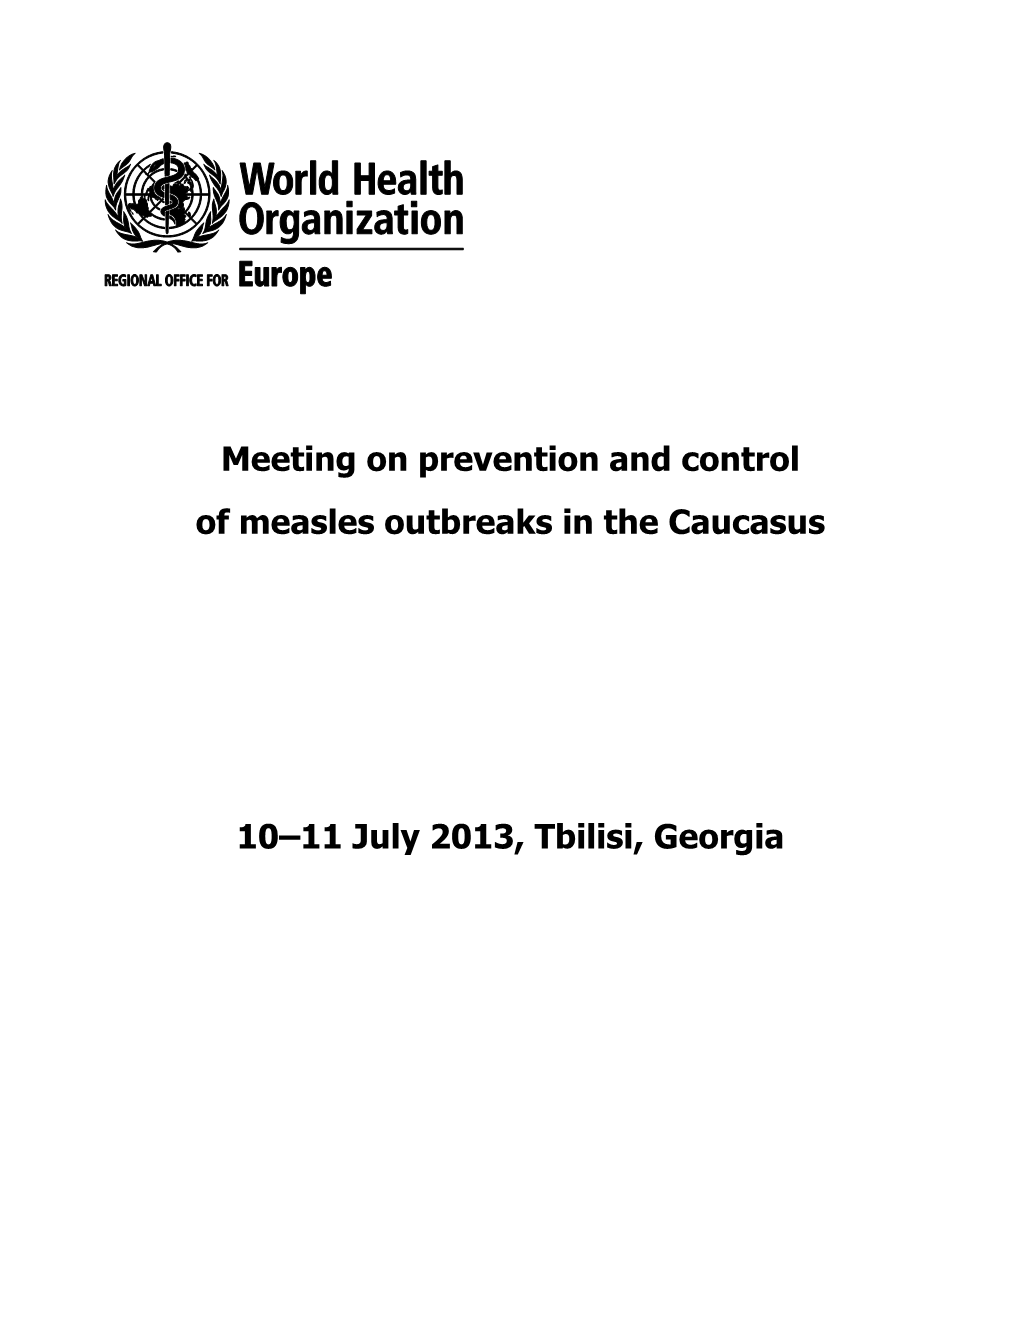 Meeting on Prevention and Control of Measles Outbreaks in the Caucasus